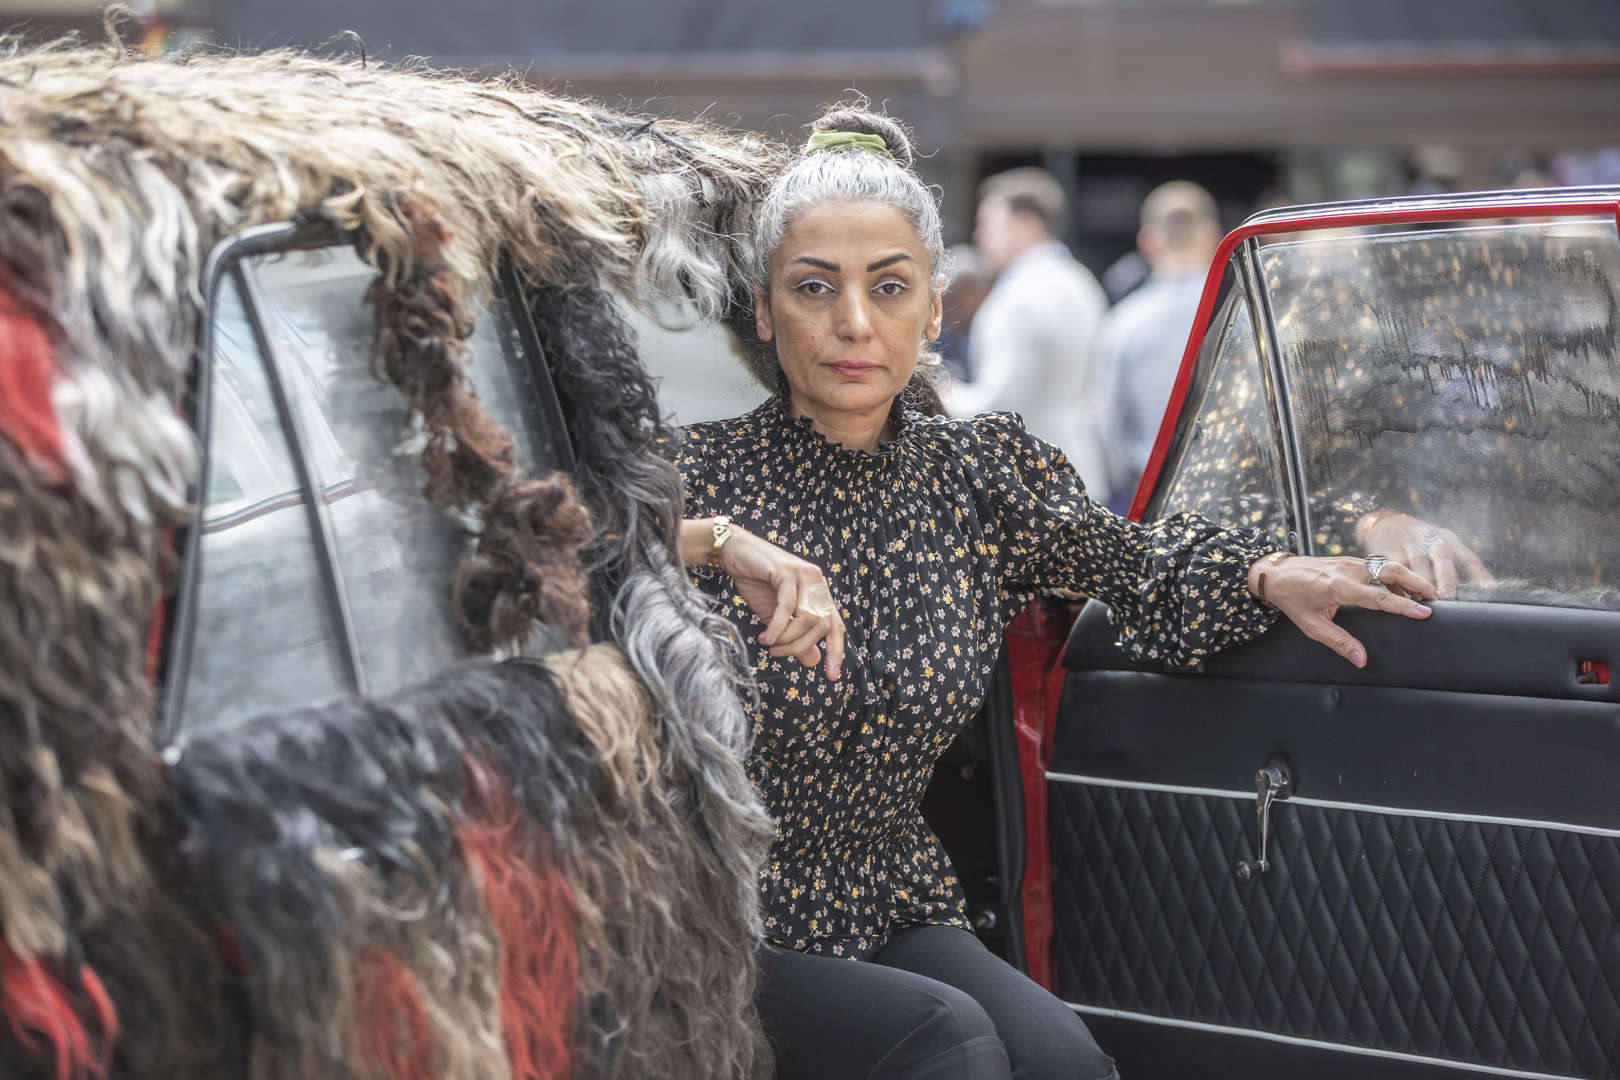 Iranian-Canadian artist Simin Keramati sits in the PaykanArtCar during its unveiling at the Oslo Freedom Forum on 13 June 2023. The car is adorned with women's hair, serving as a visual representation of support for the “Women, Life, Freedom” protest movement against Iran’s Islamist regime. Photo: Fredrik Naumann / AP Images / PaykanArtCar